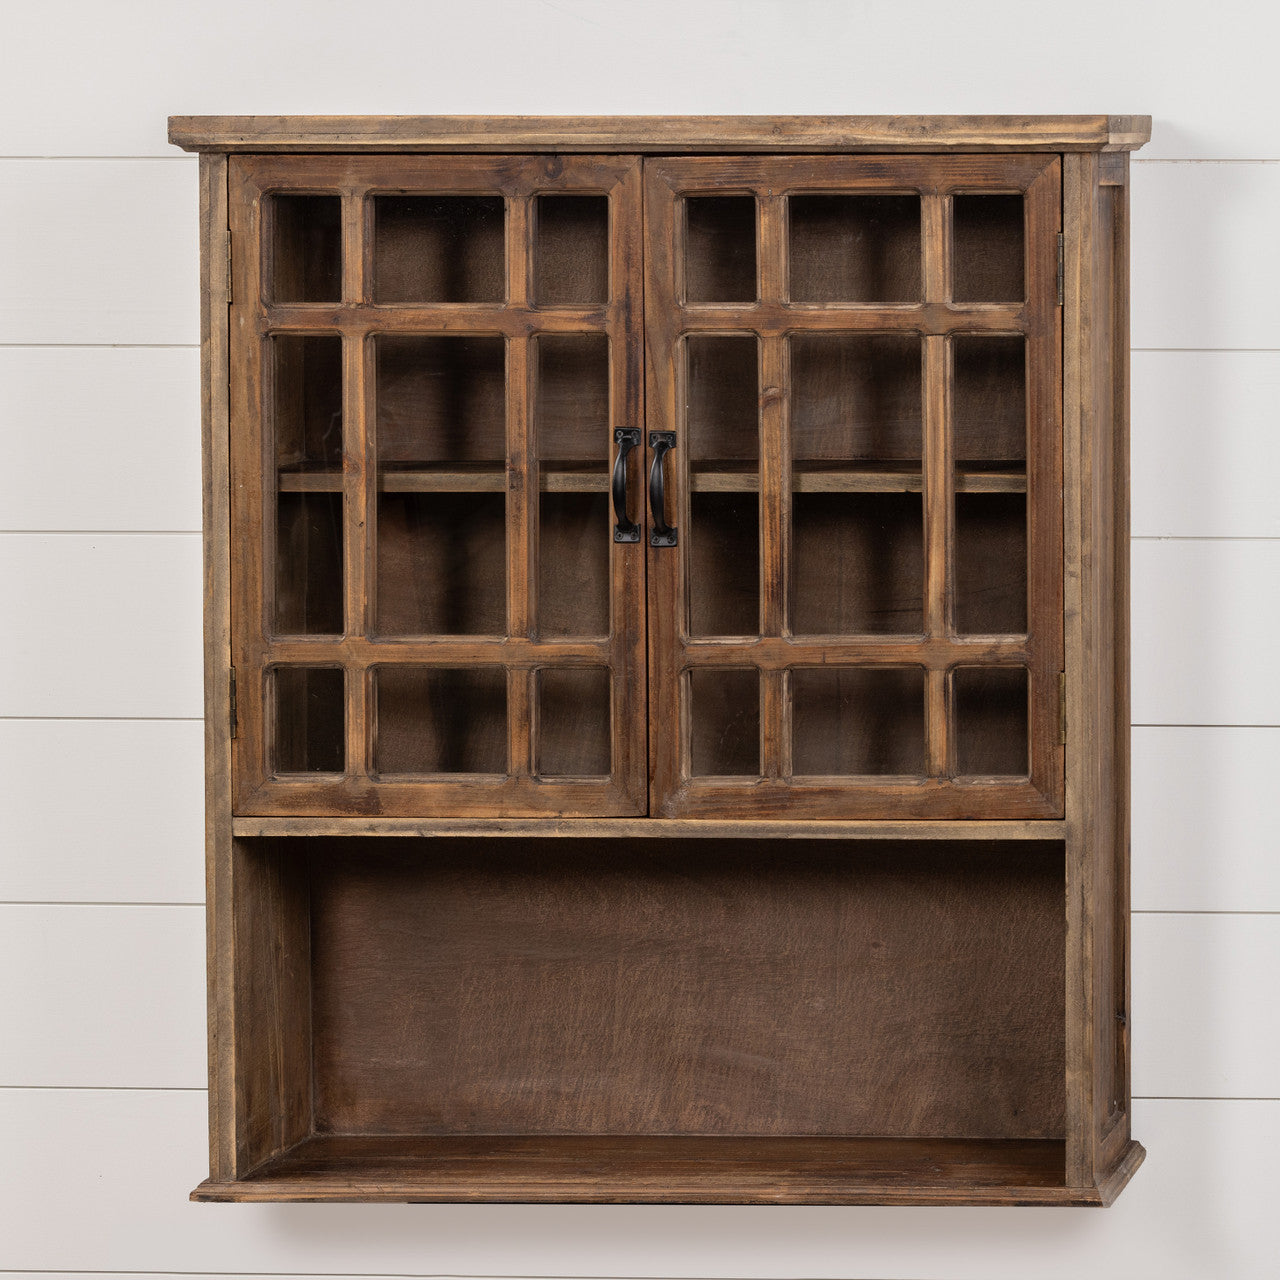 The Cottage Wall Cabinet